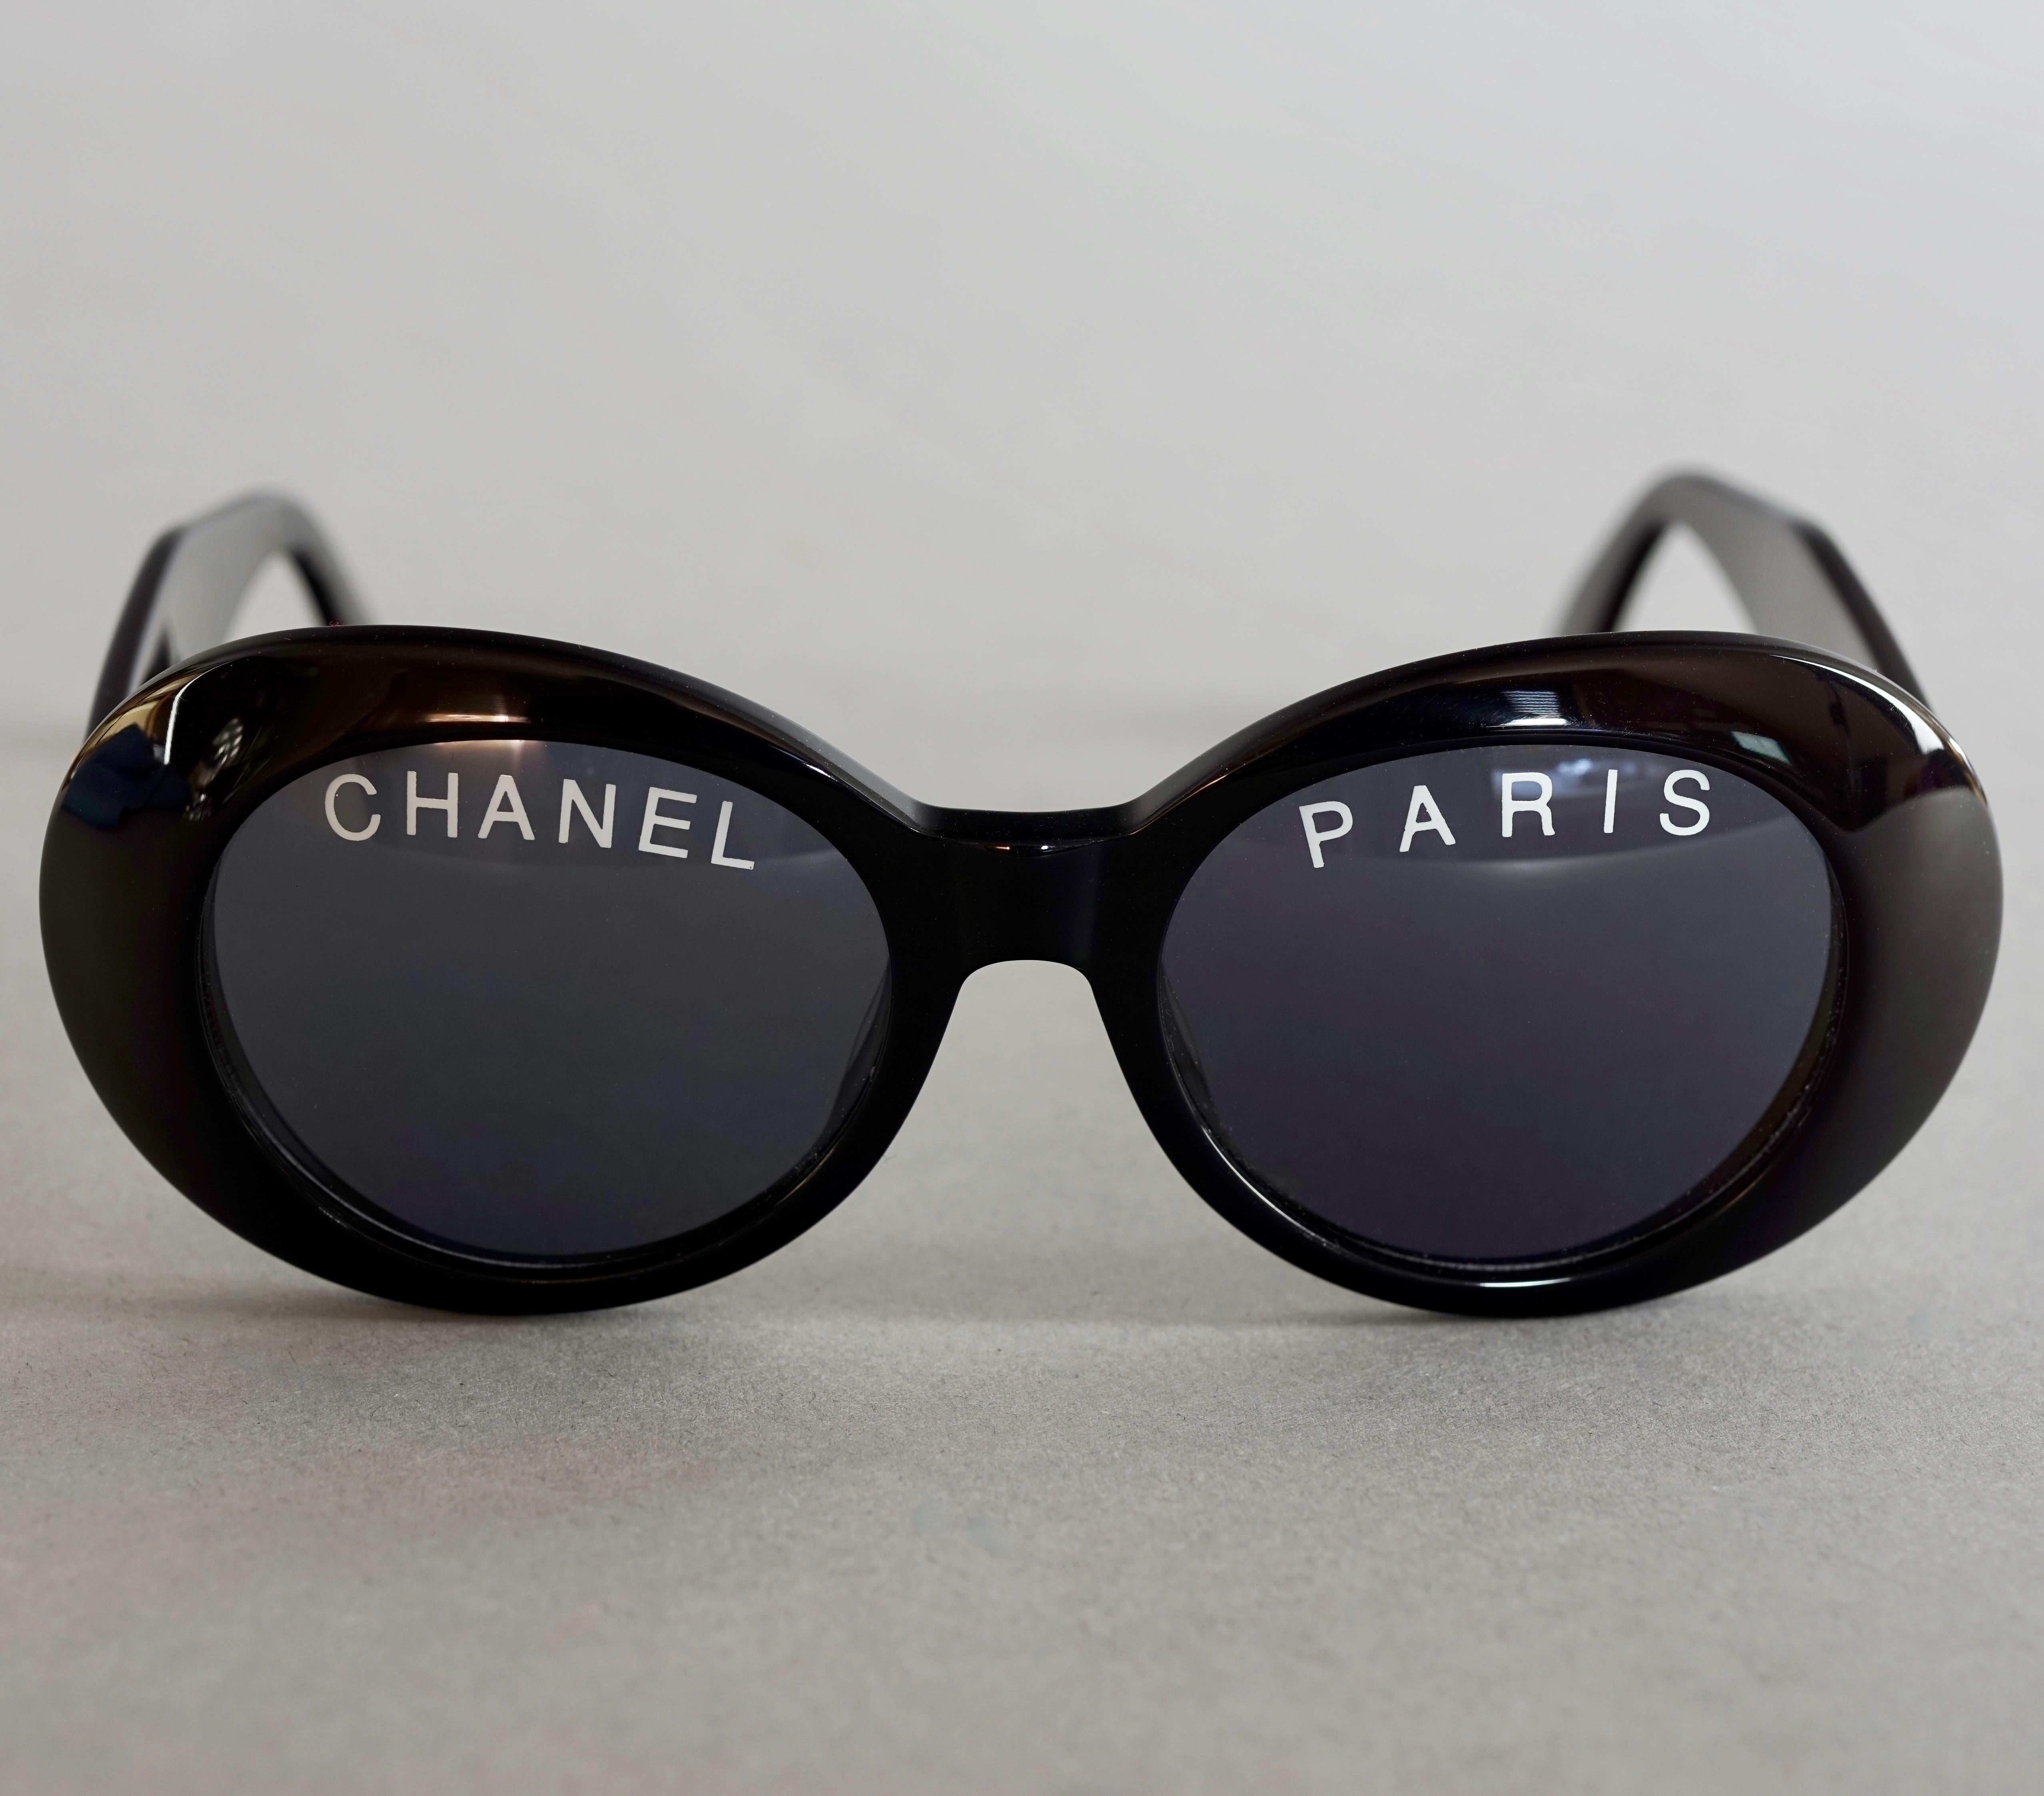 Vintage 1993 Iconic CHANEL PARIS Spelled Black Sunglasses In Excellent Condition For Sale In Kingersheim, Alsace